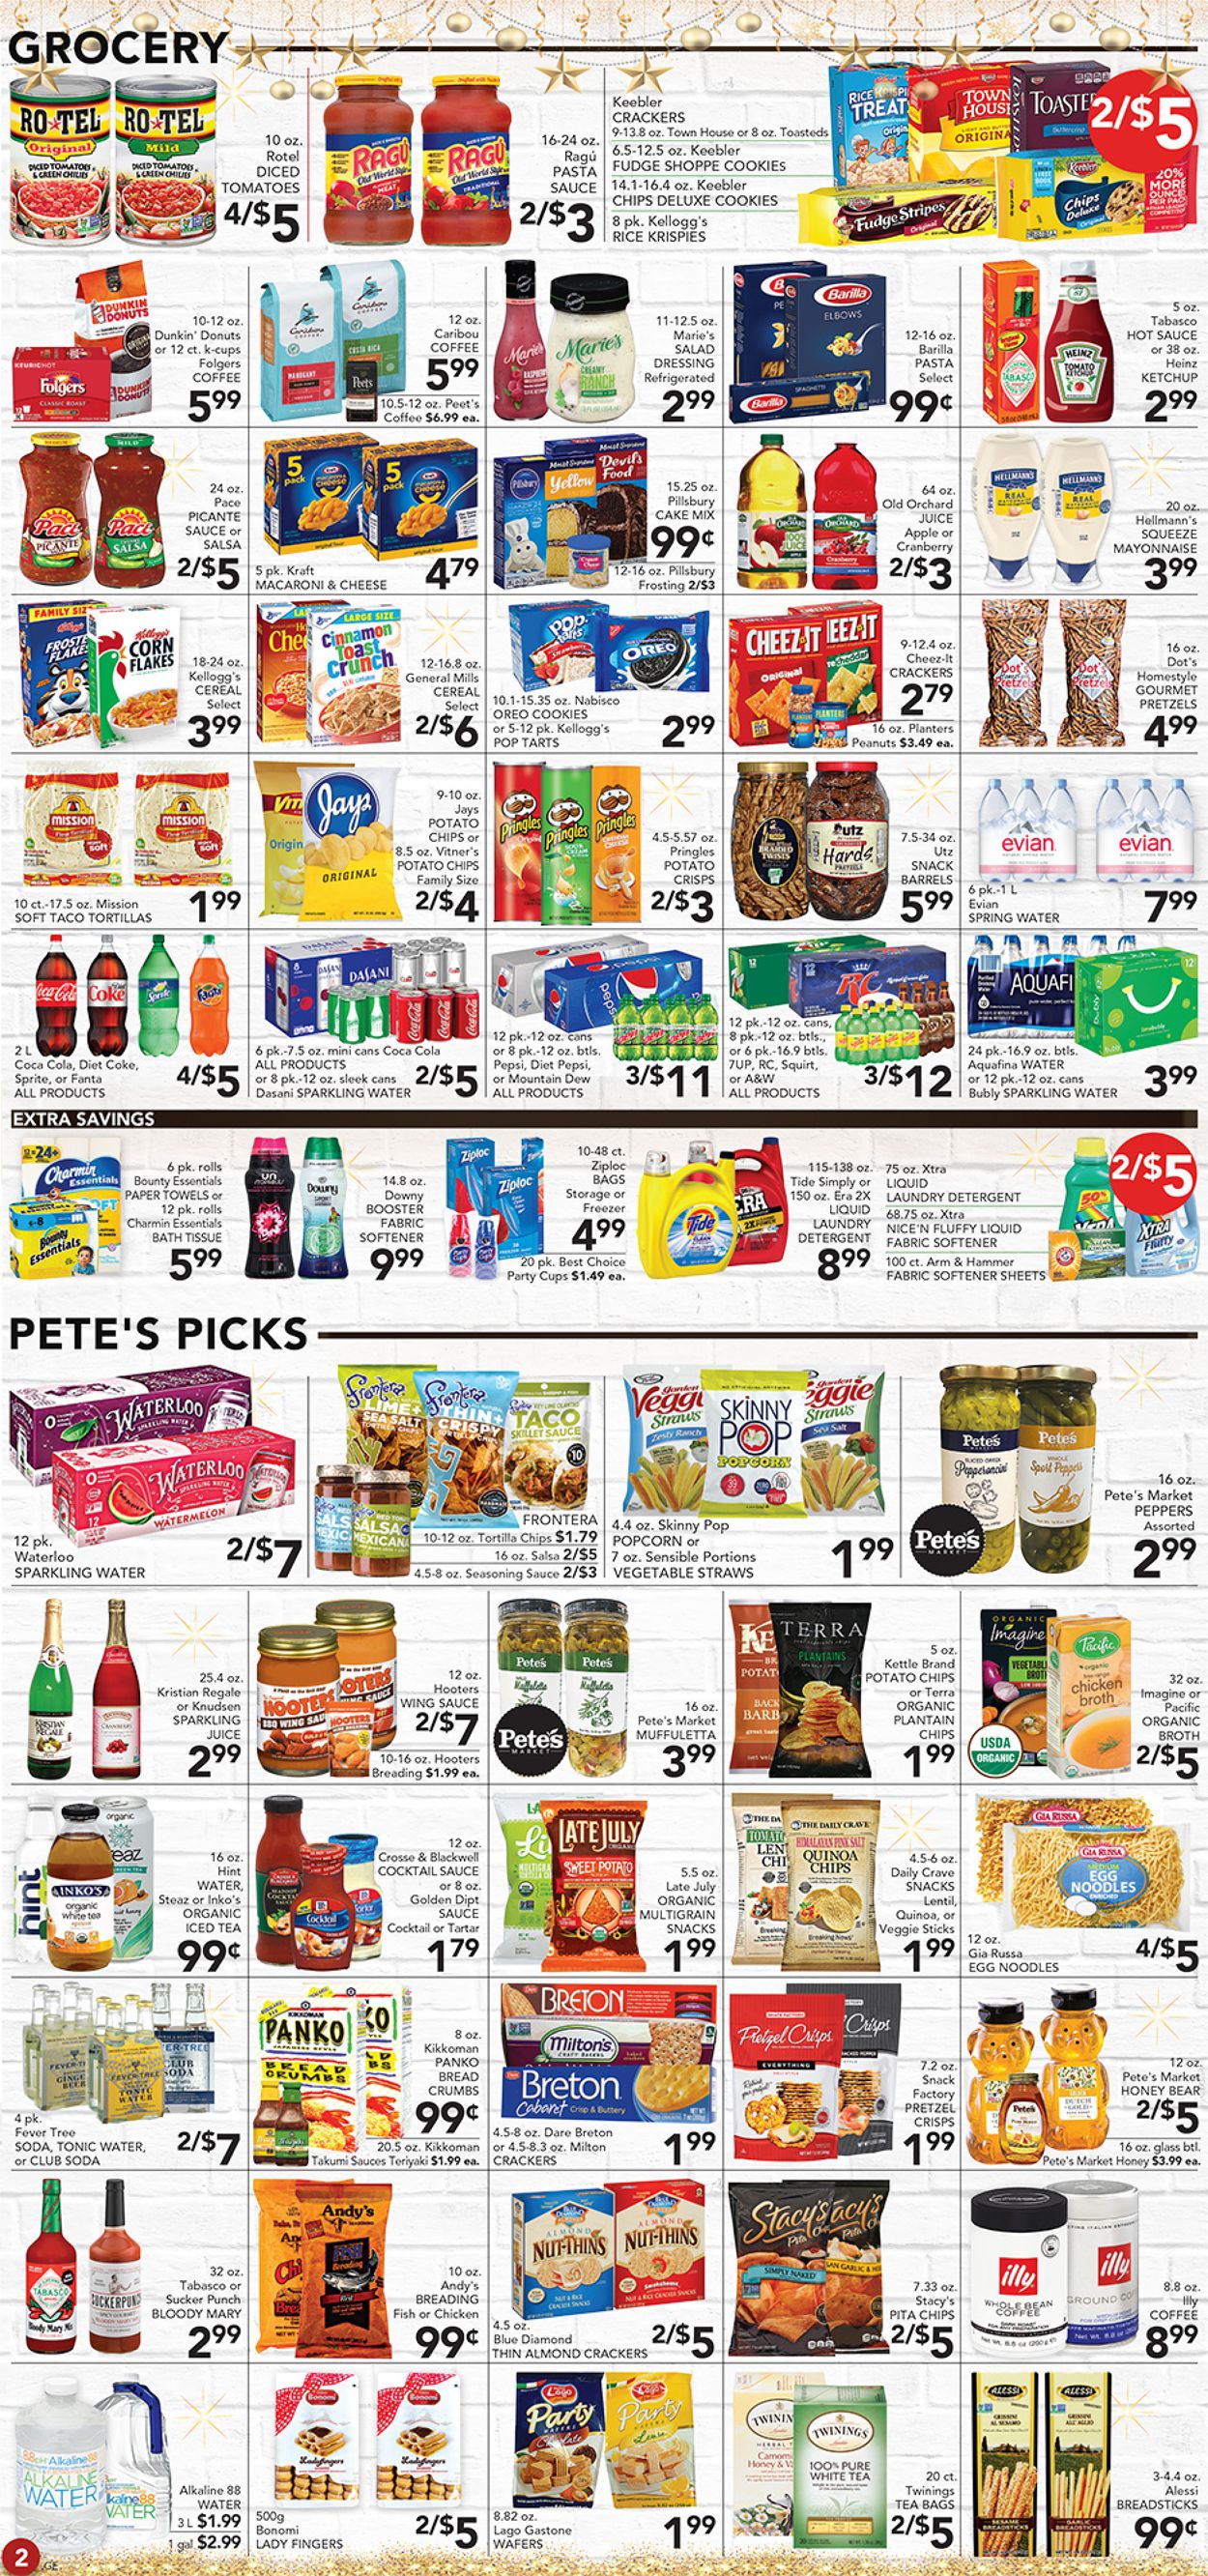 Catalogue Pete's Fresh Market - New Year's Ad 2019/2020 from 12/26/2019